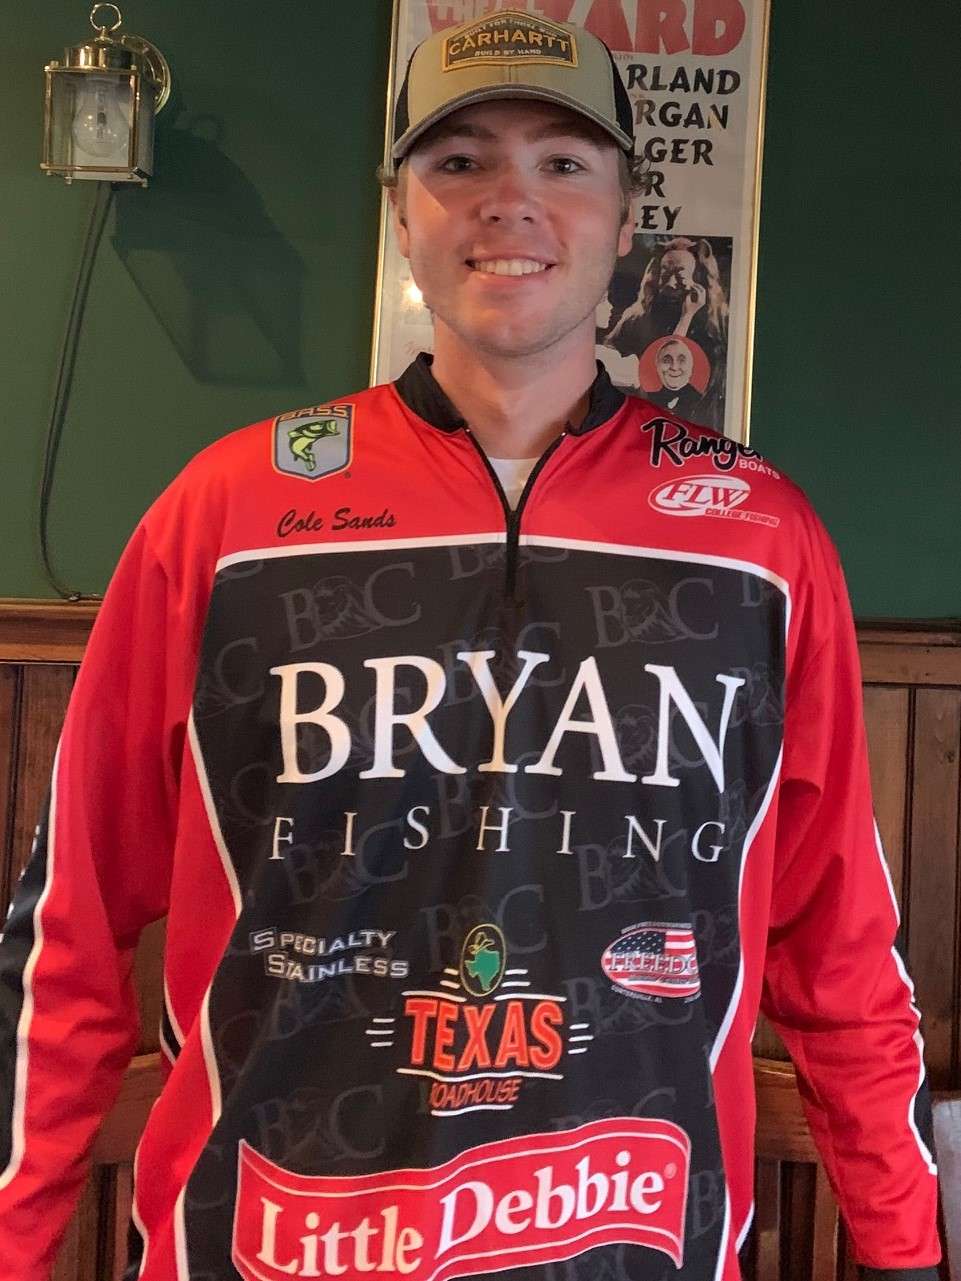 No. 3 seed<BR> Cole Sands, Bryan College<BR> Age: 22. Hometown: Calhoun, Tenn.<BR> Graduated in spring, pursuing masterâs degree in marketing.<BR> Favorite fishing technique: Having a Jig in grass.<BR> Thoughts on Watts Bar: âI fish there 20 plus times a year, but August is (really tough.)â<BR> Weight to advance: â10 to 16 pounds.â<BR> What would it mean to advance to the Bassmaster Classic? âWords canât describe how much it would mean to win this tournament. I want to compete professionally so bad, and to compete in the pinnacle event of bass fishing would be unreal.â